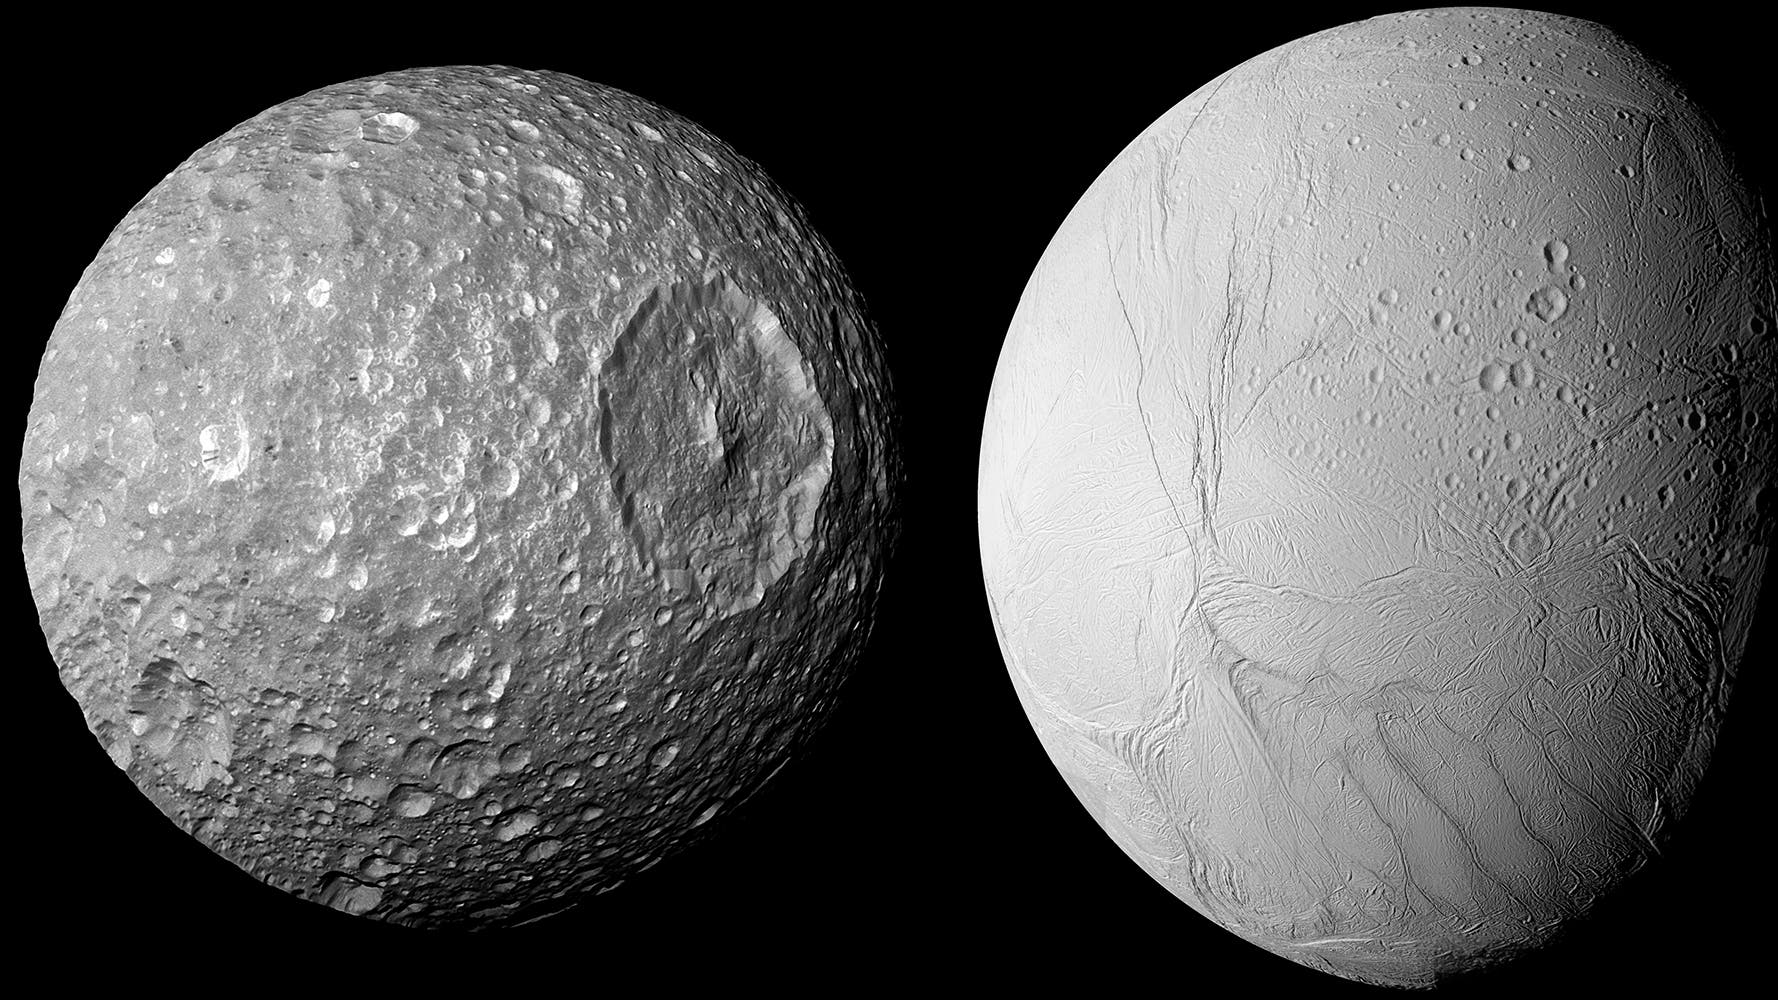 Solar System: Is there an inner ocean on Saturn's moon Mimas